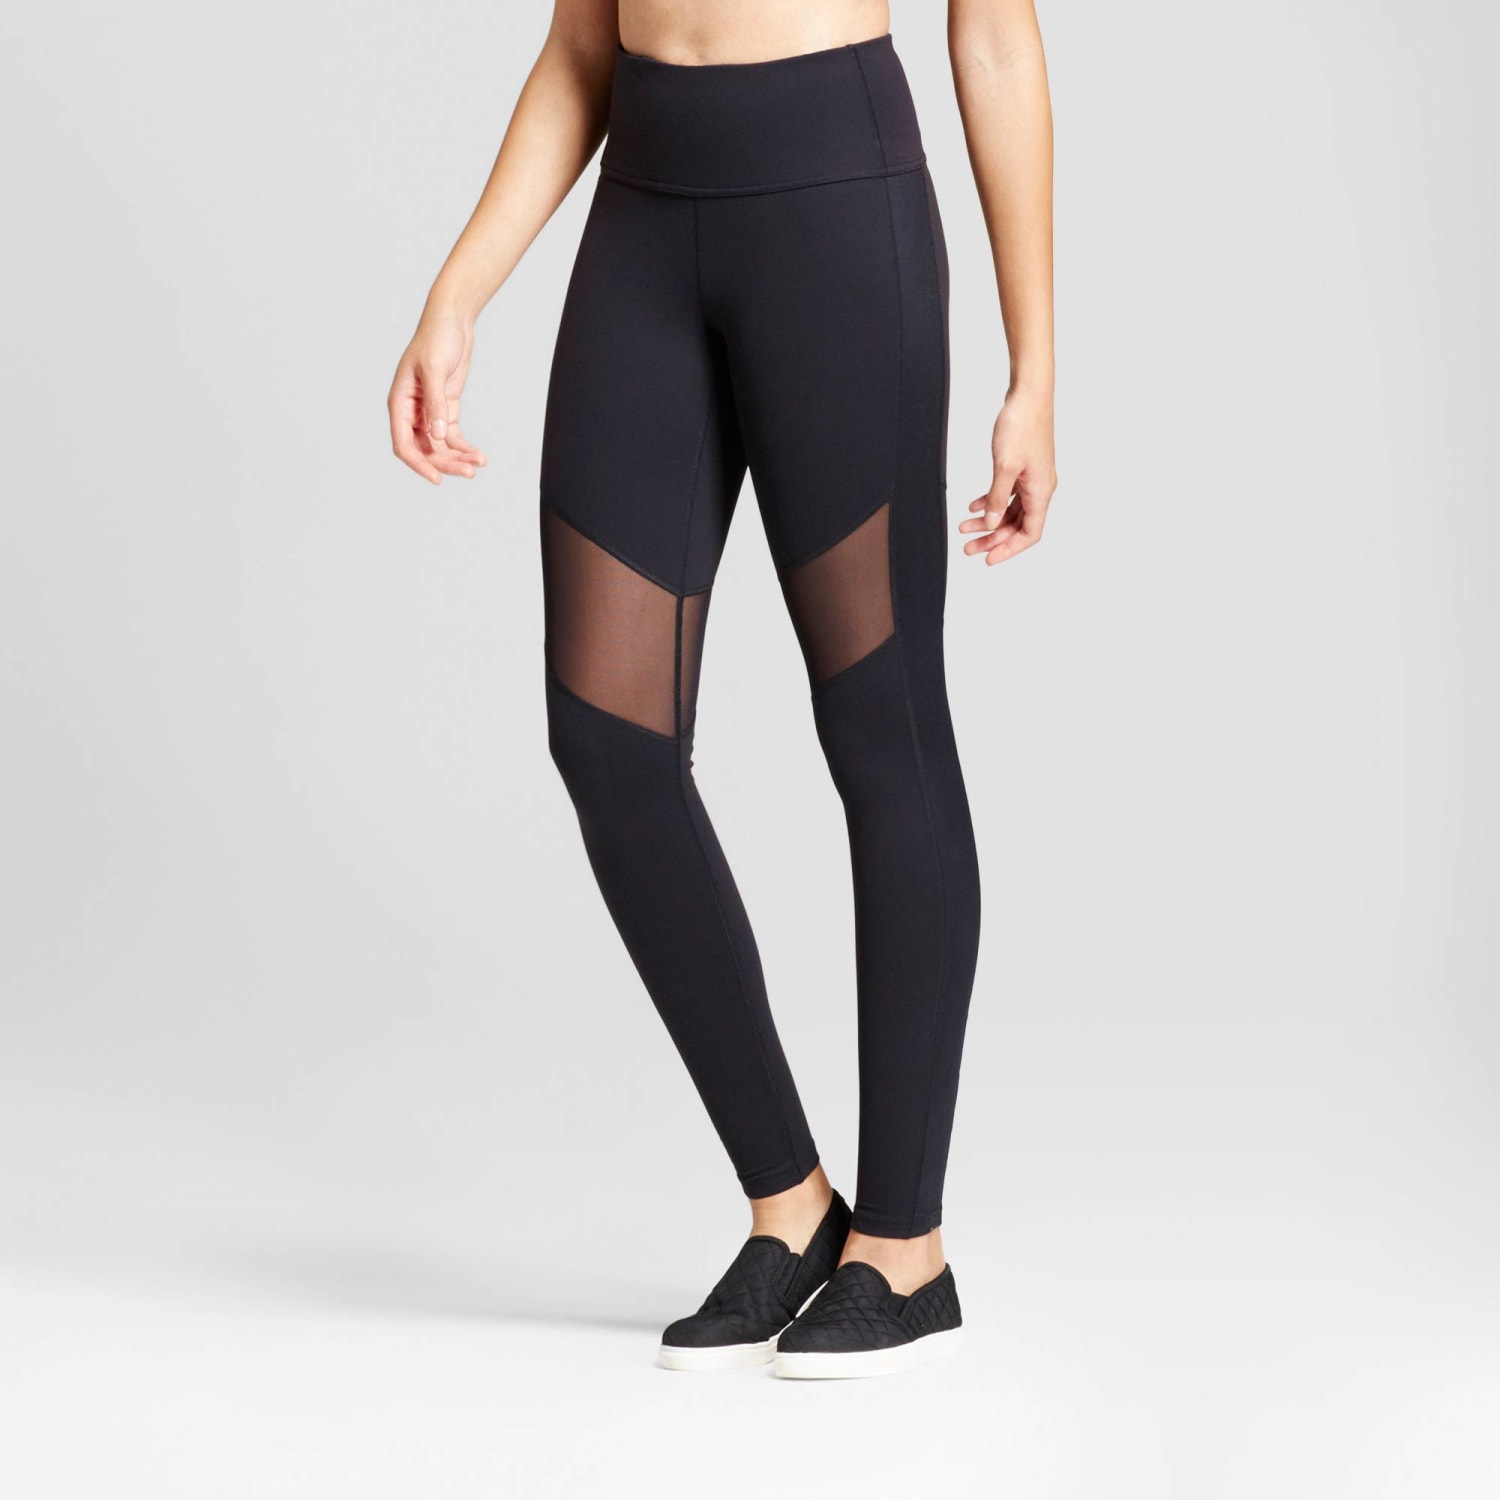 Target's New JoyLab Activewear Brand to up Style and Performance